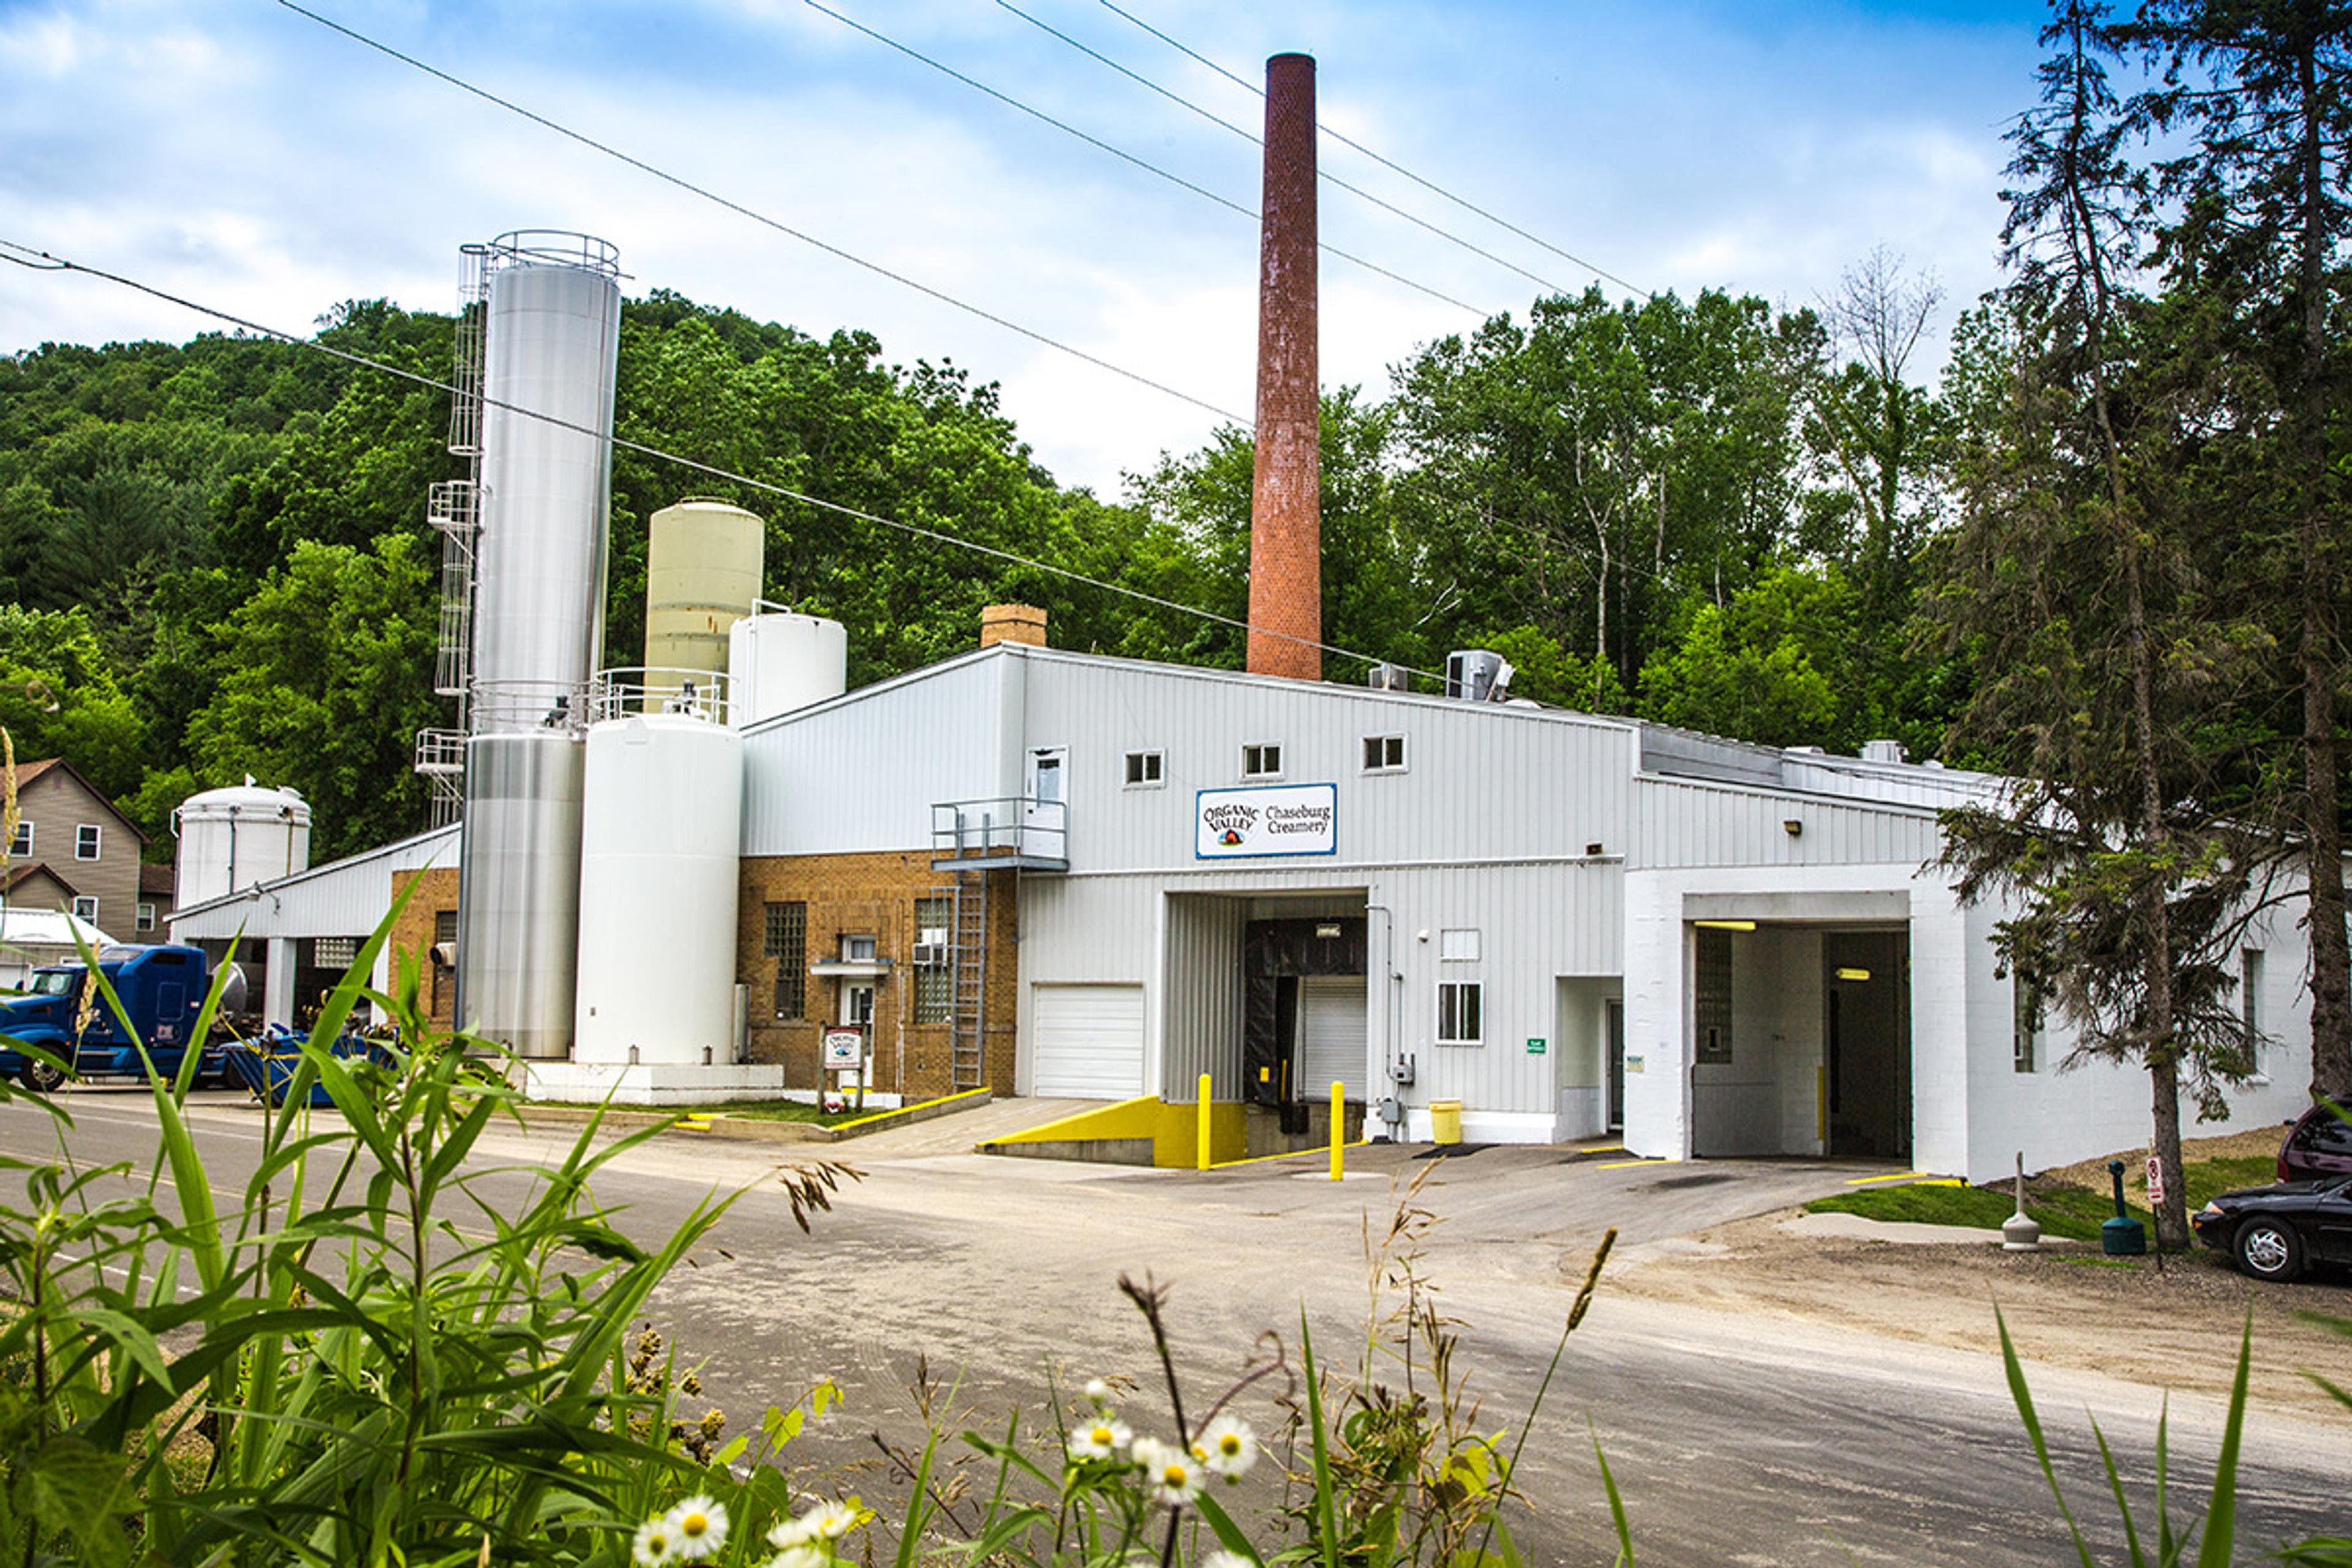 View of the front of the Chaseburg Creamery plant.